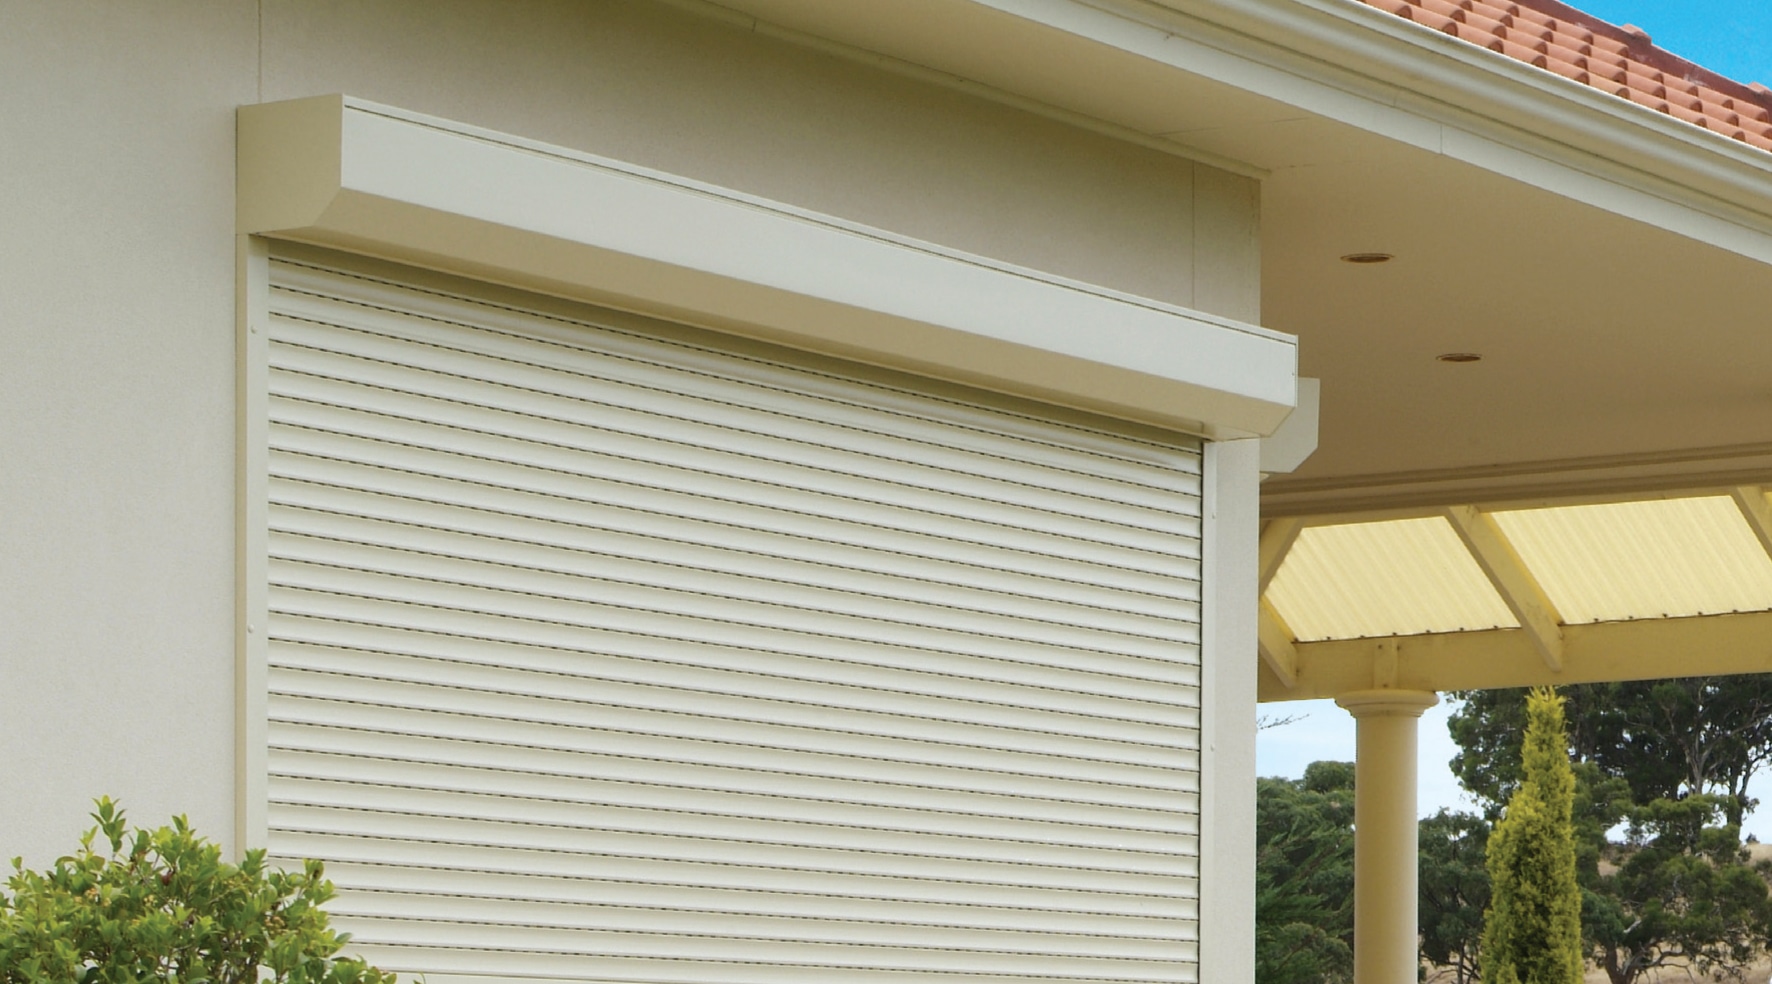 How to fix roller shutters